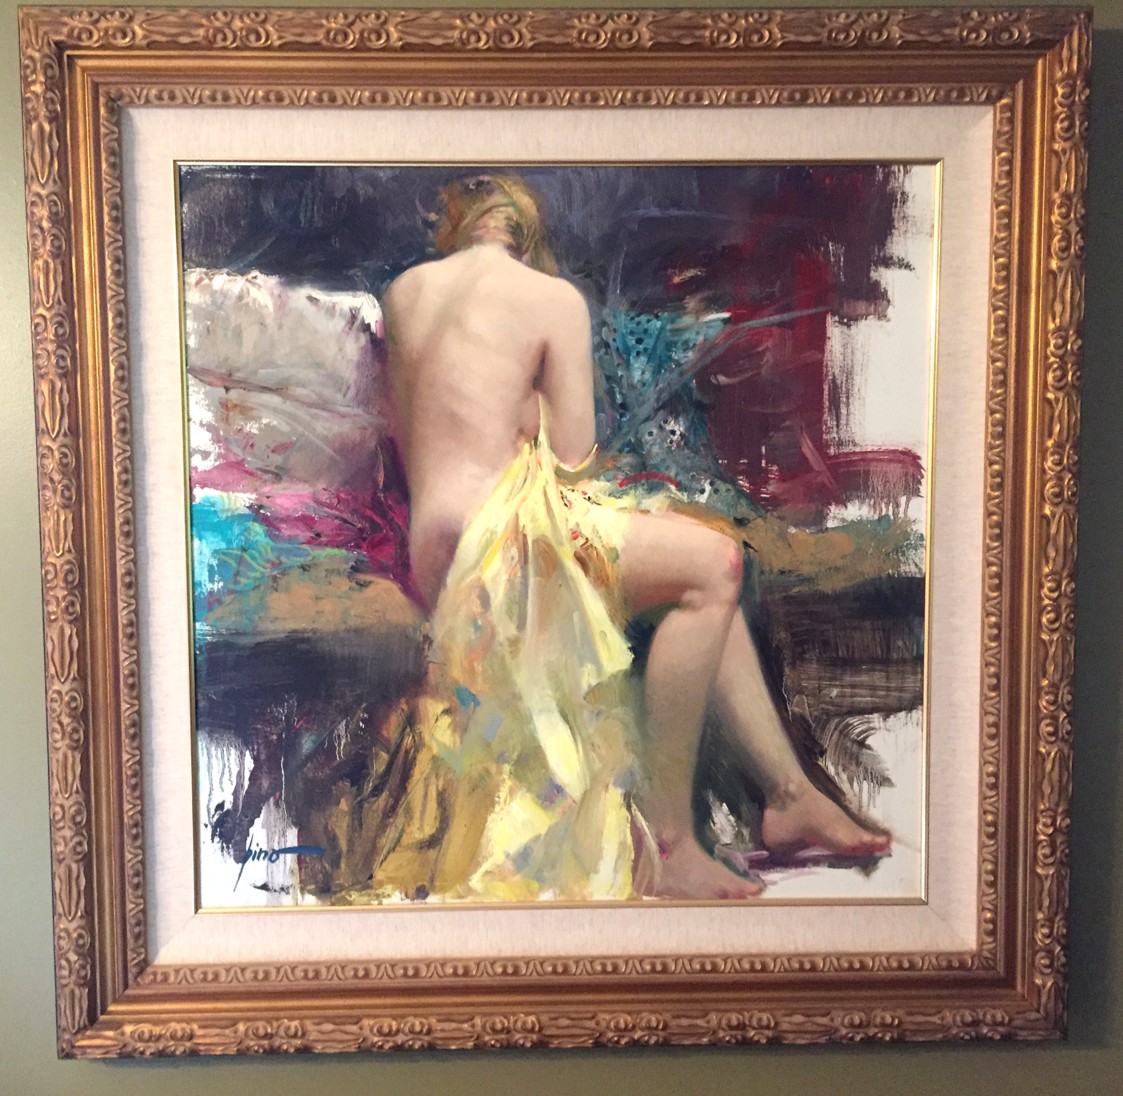 The Pose by Pino, Original Painting, Oil on Canvas
Size: 32 x 32